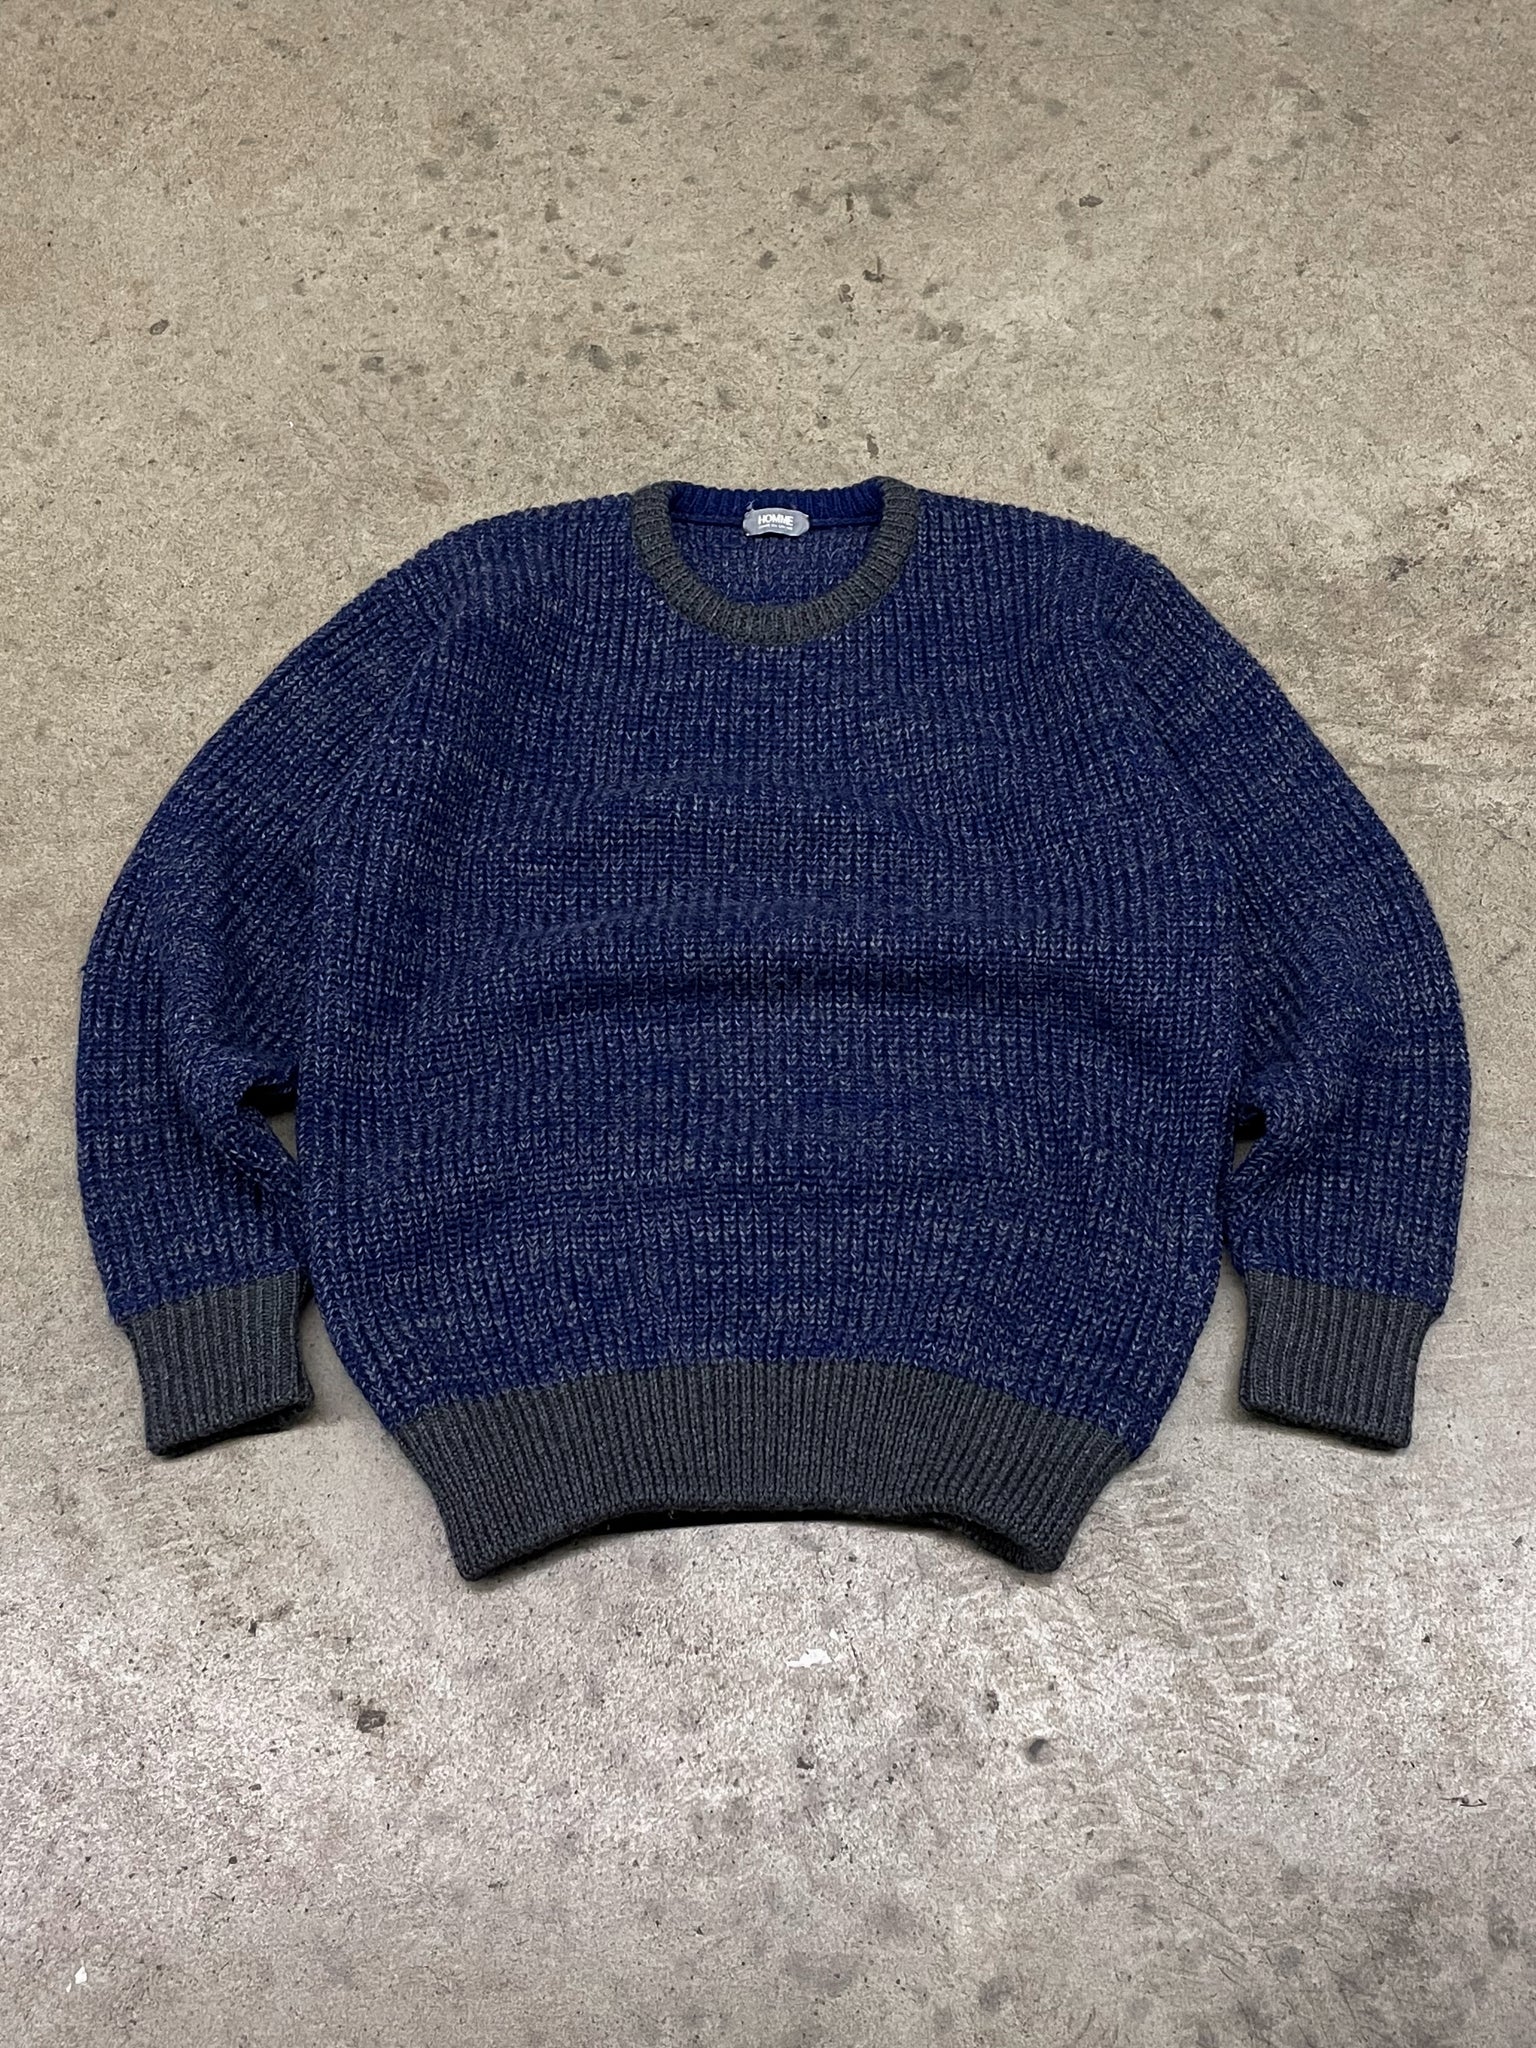 CDG HOMME CABLE KNIT SWEATER BLUE / Medium